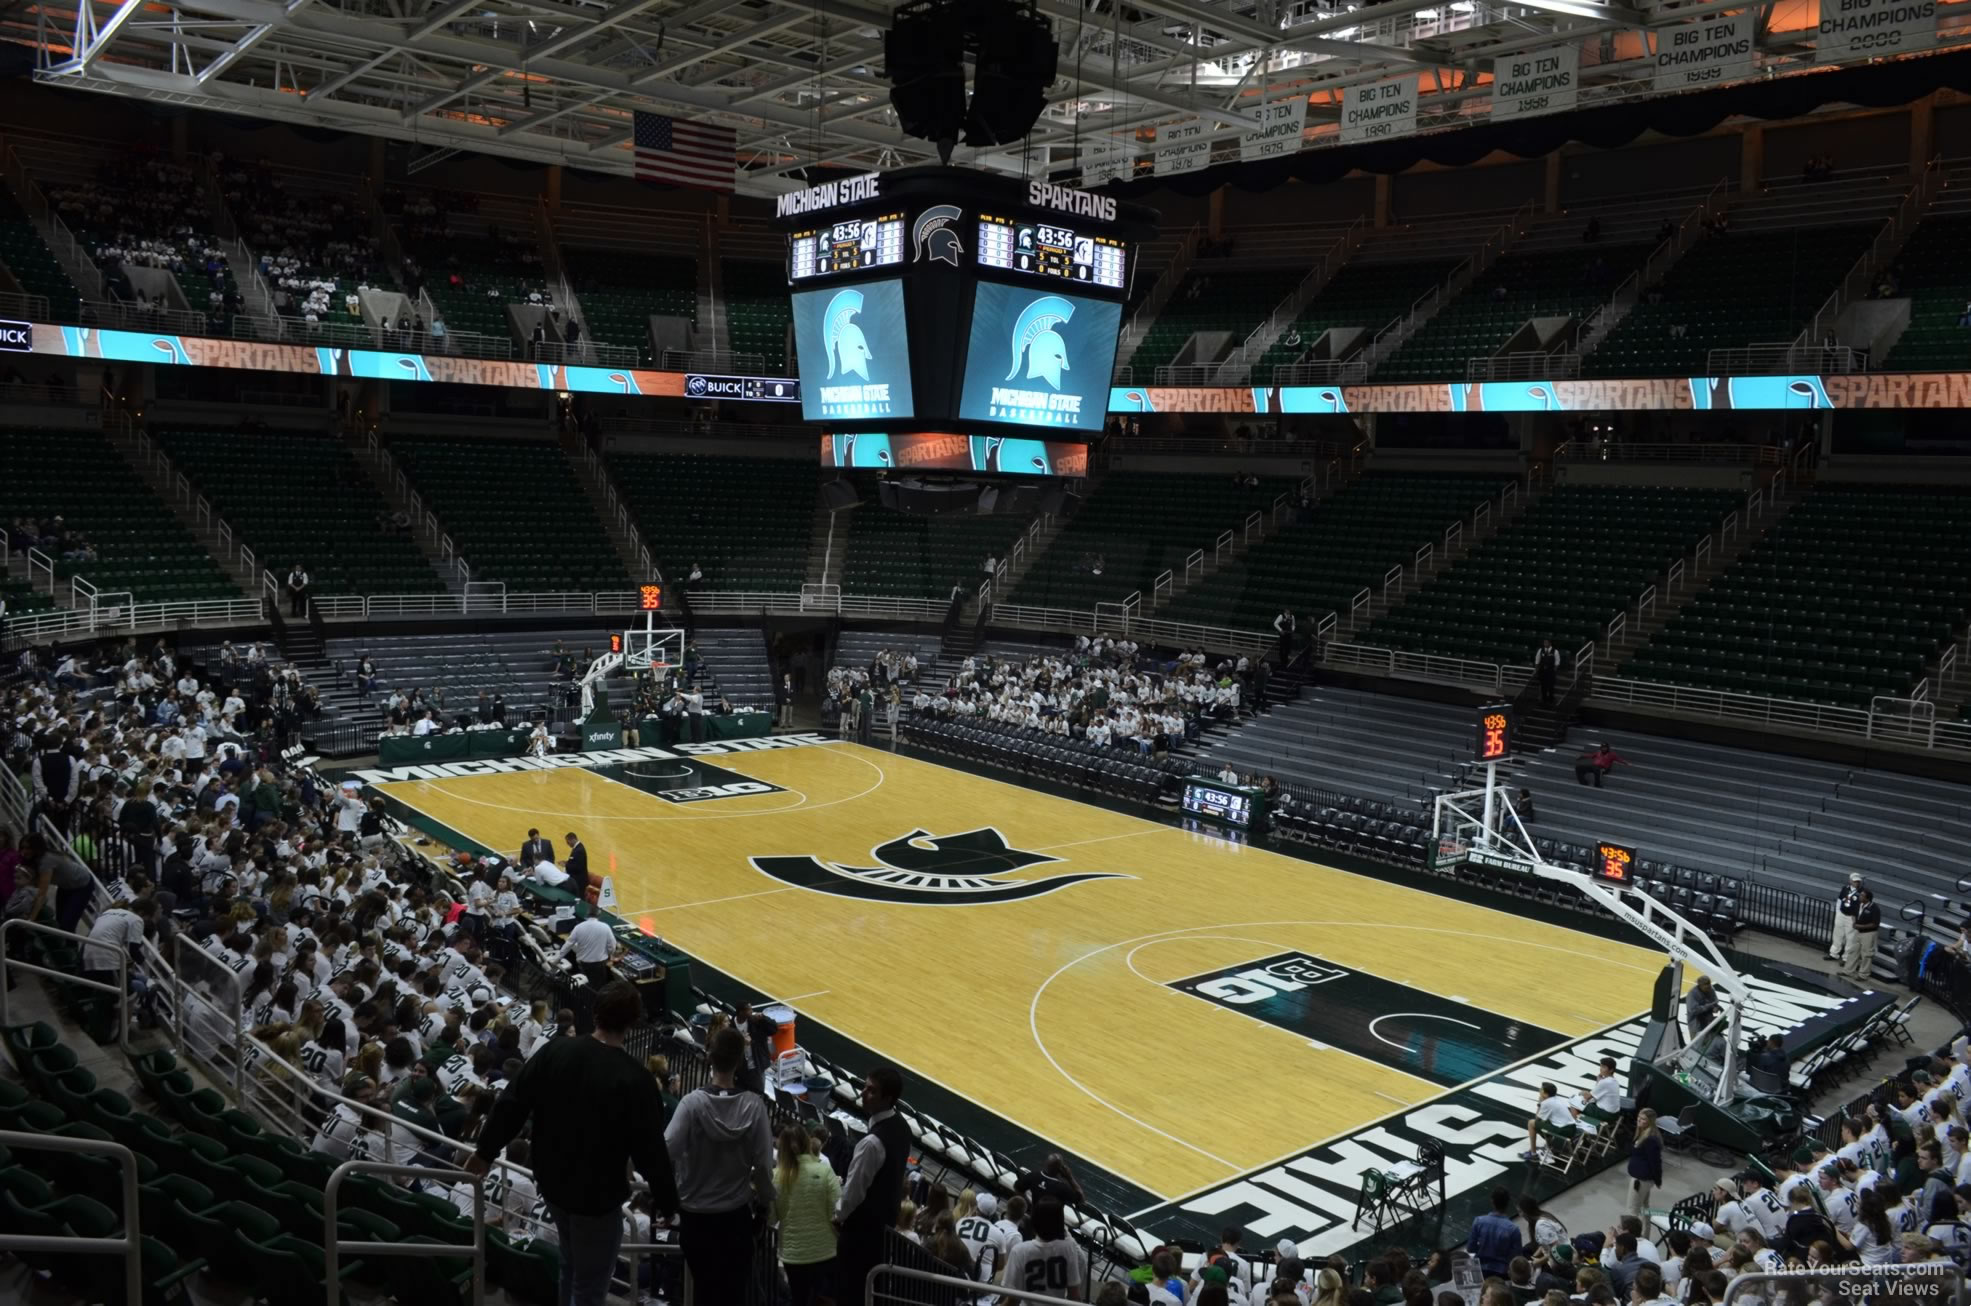 section 106, row 22 seat view  - breslin center